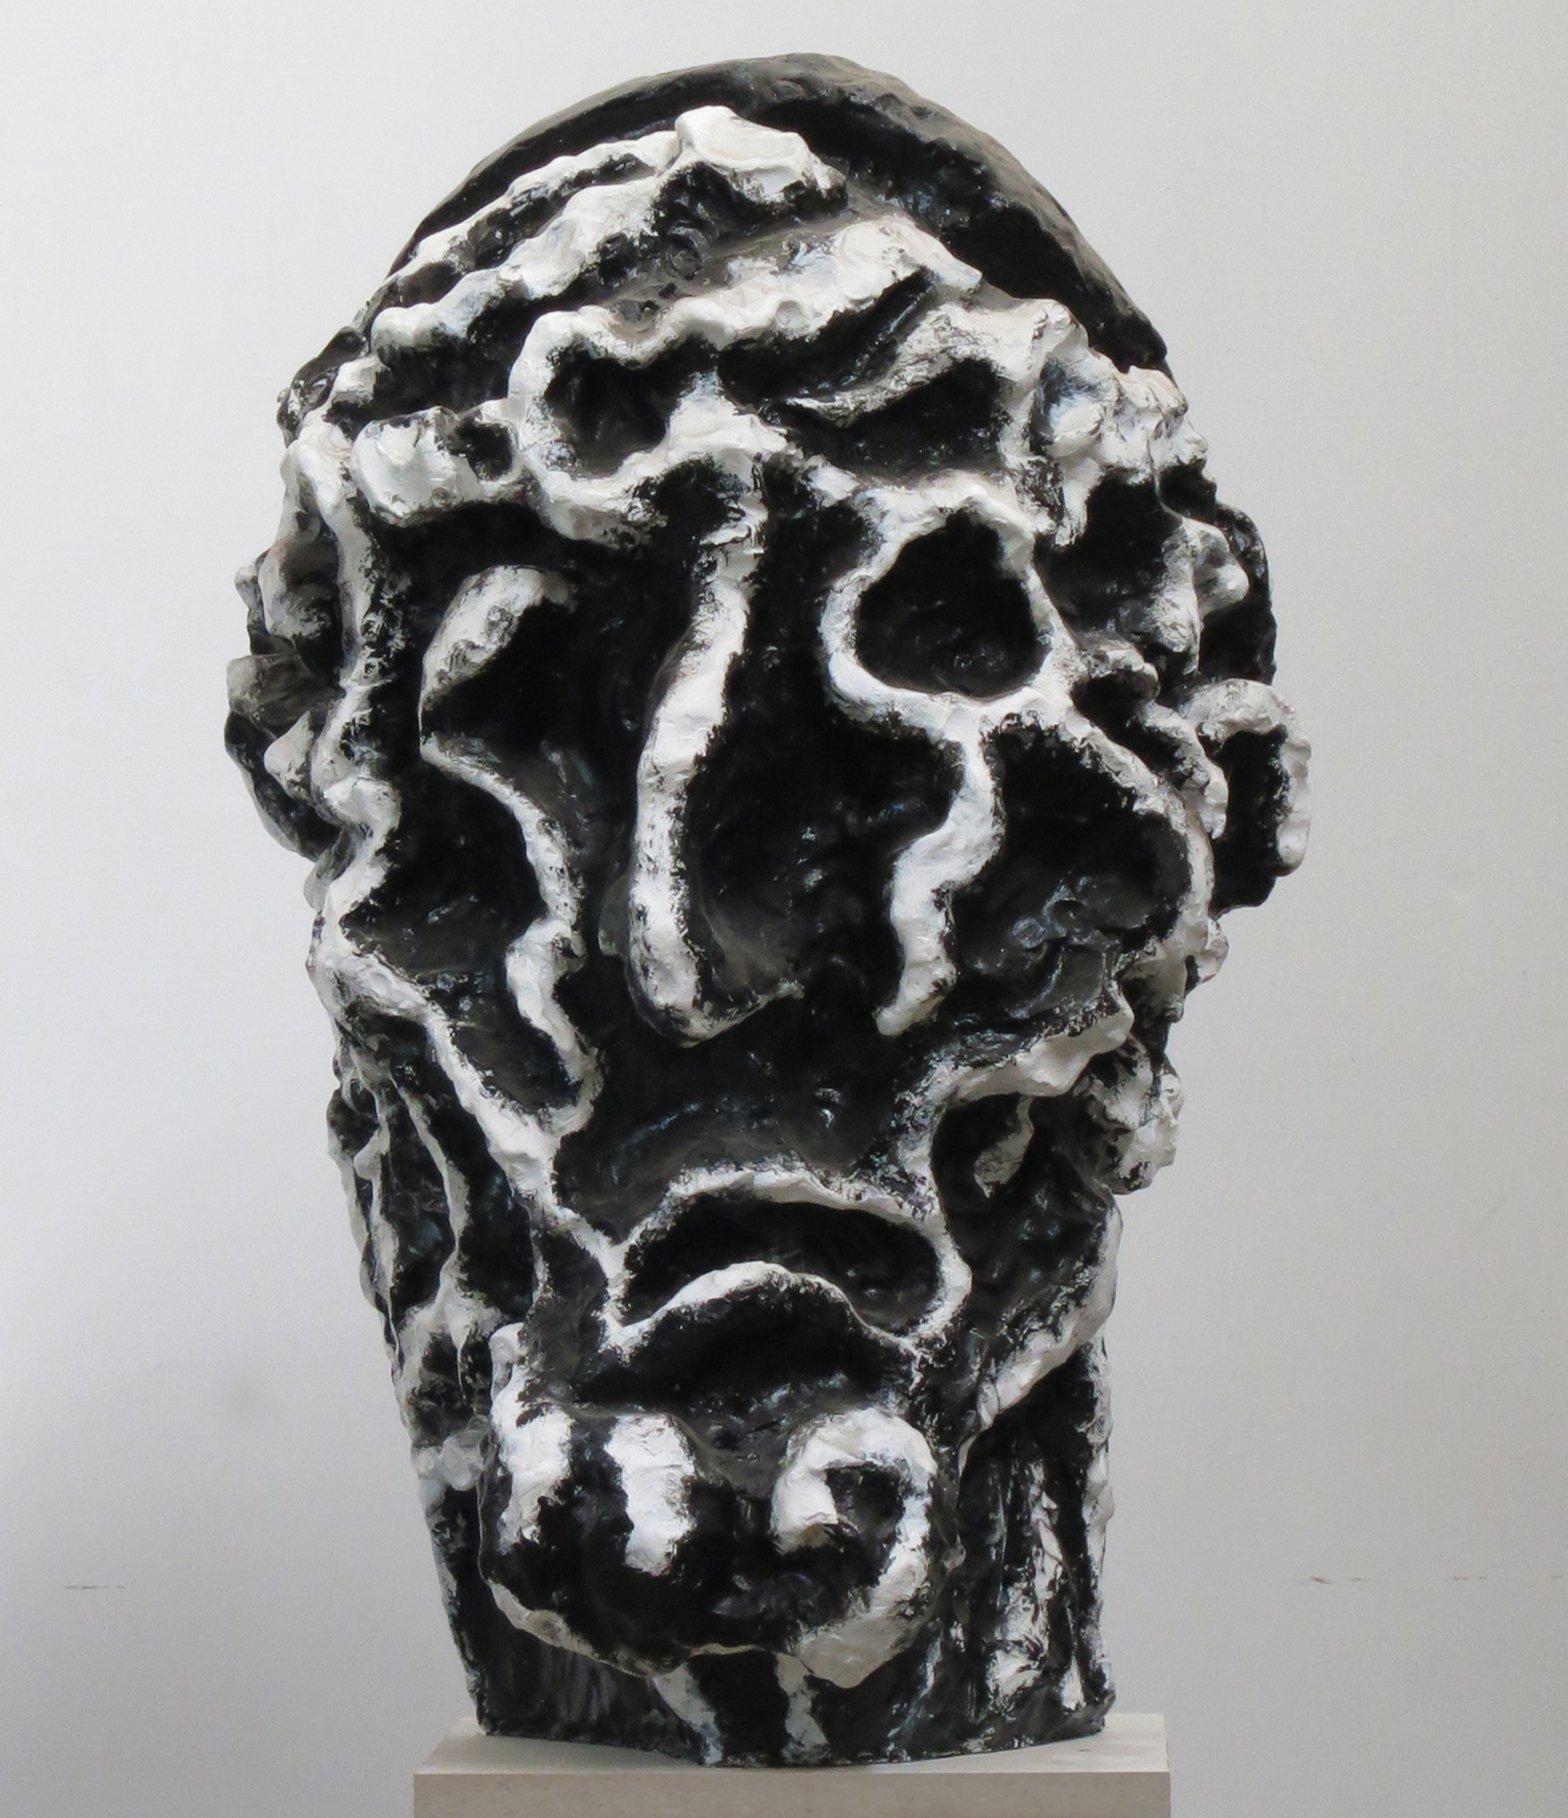 Howard Kalish Abstract Sculpture - "Large Head (Patriarch)", twice life-size mythic head in stark black and white